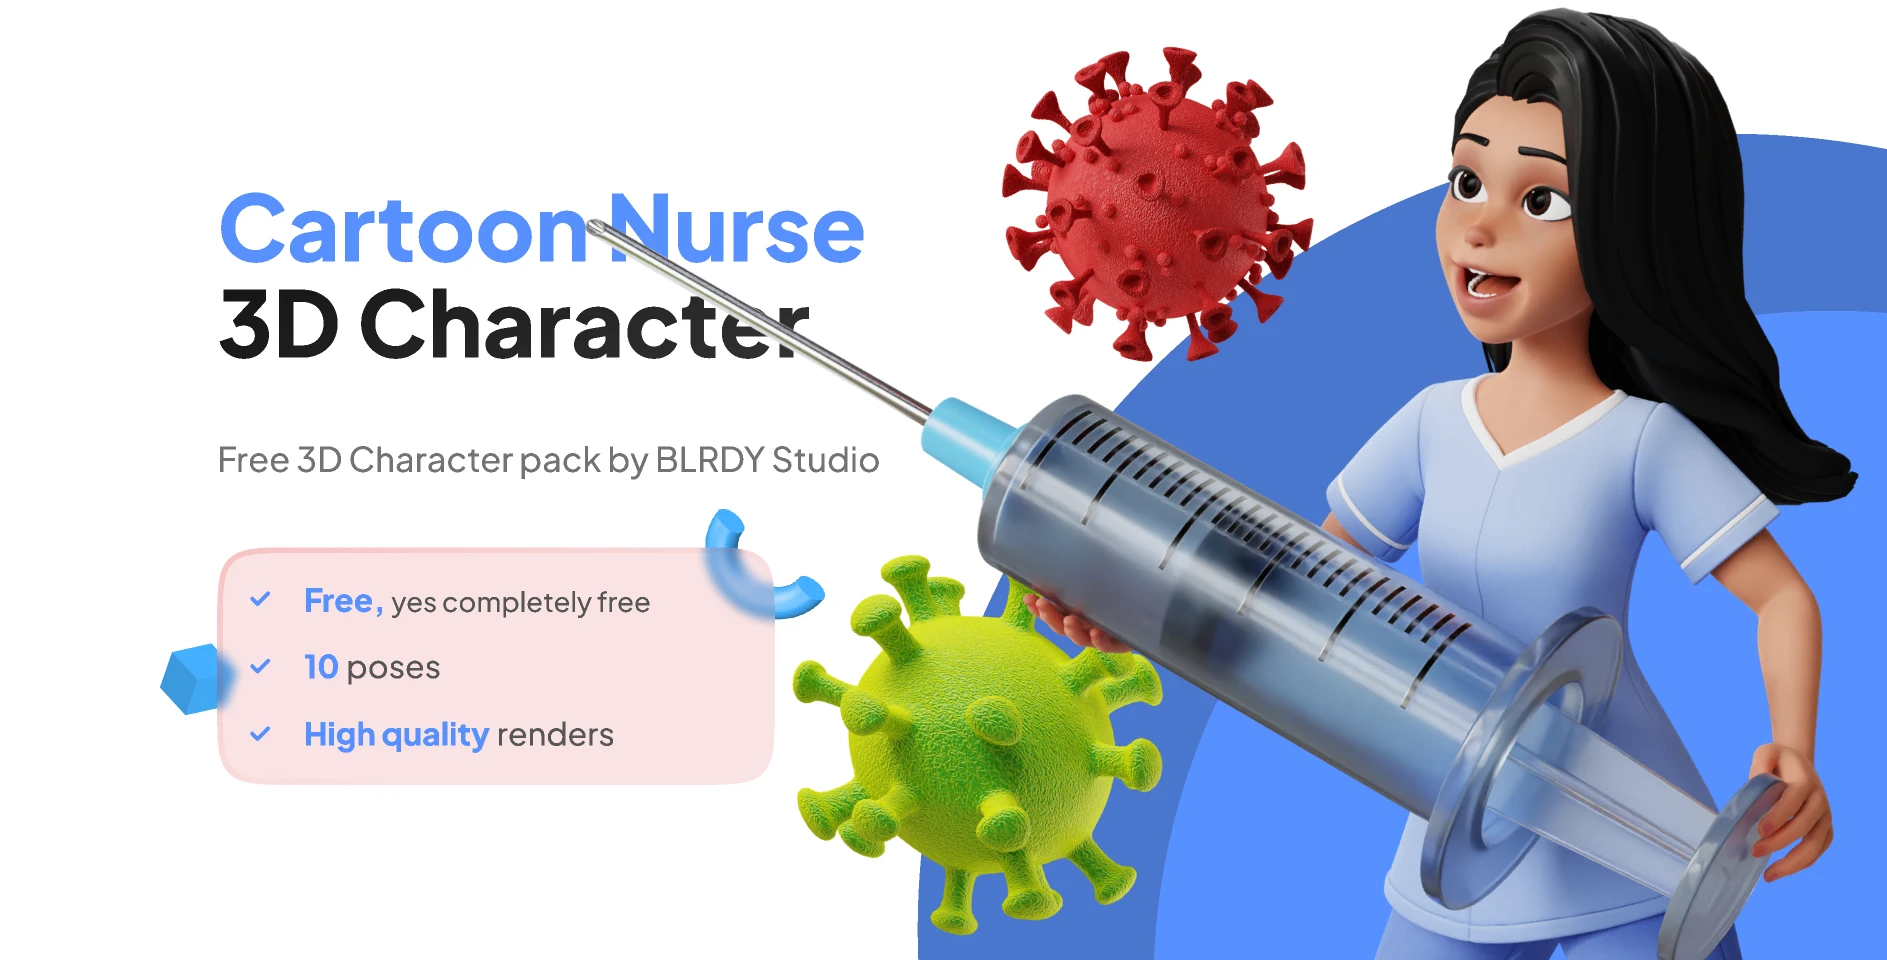 FREE 3D Nurse Character for Figma and Adobe XD